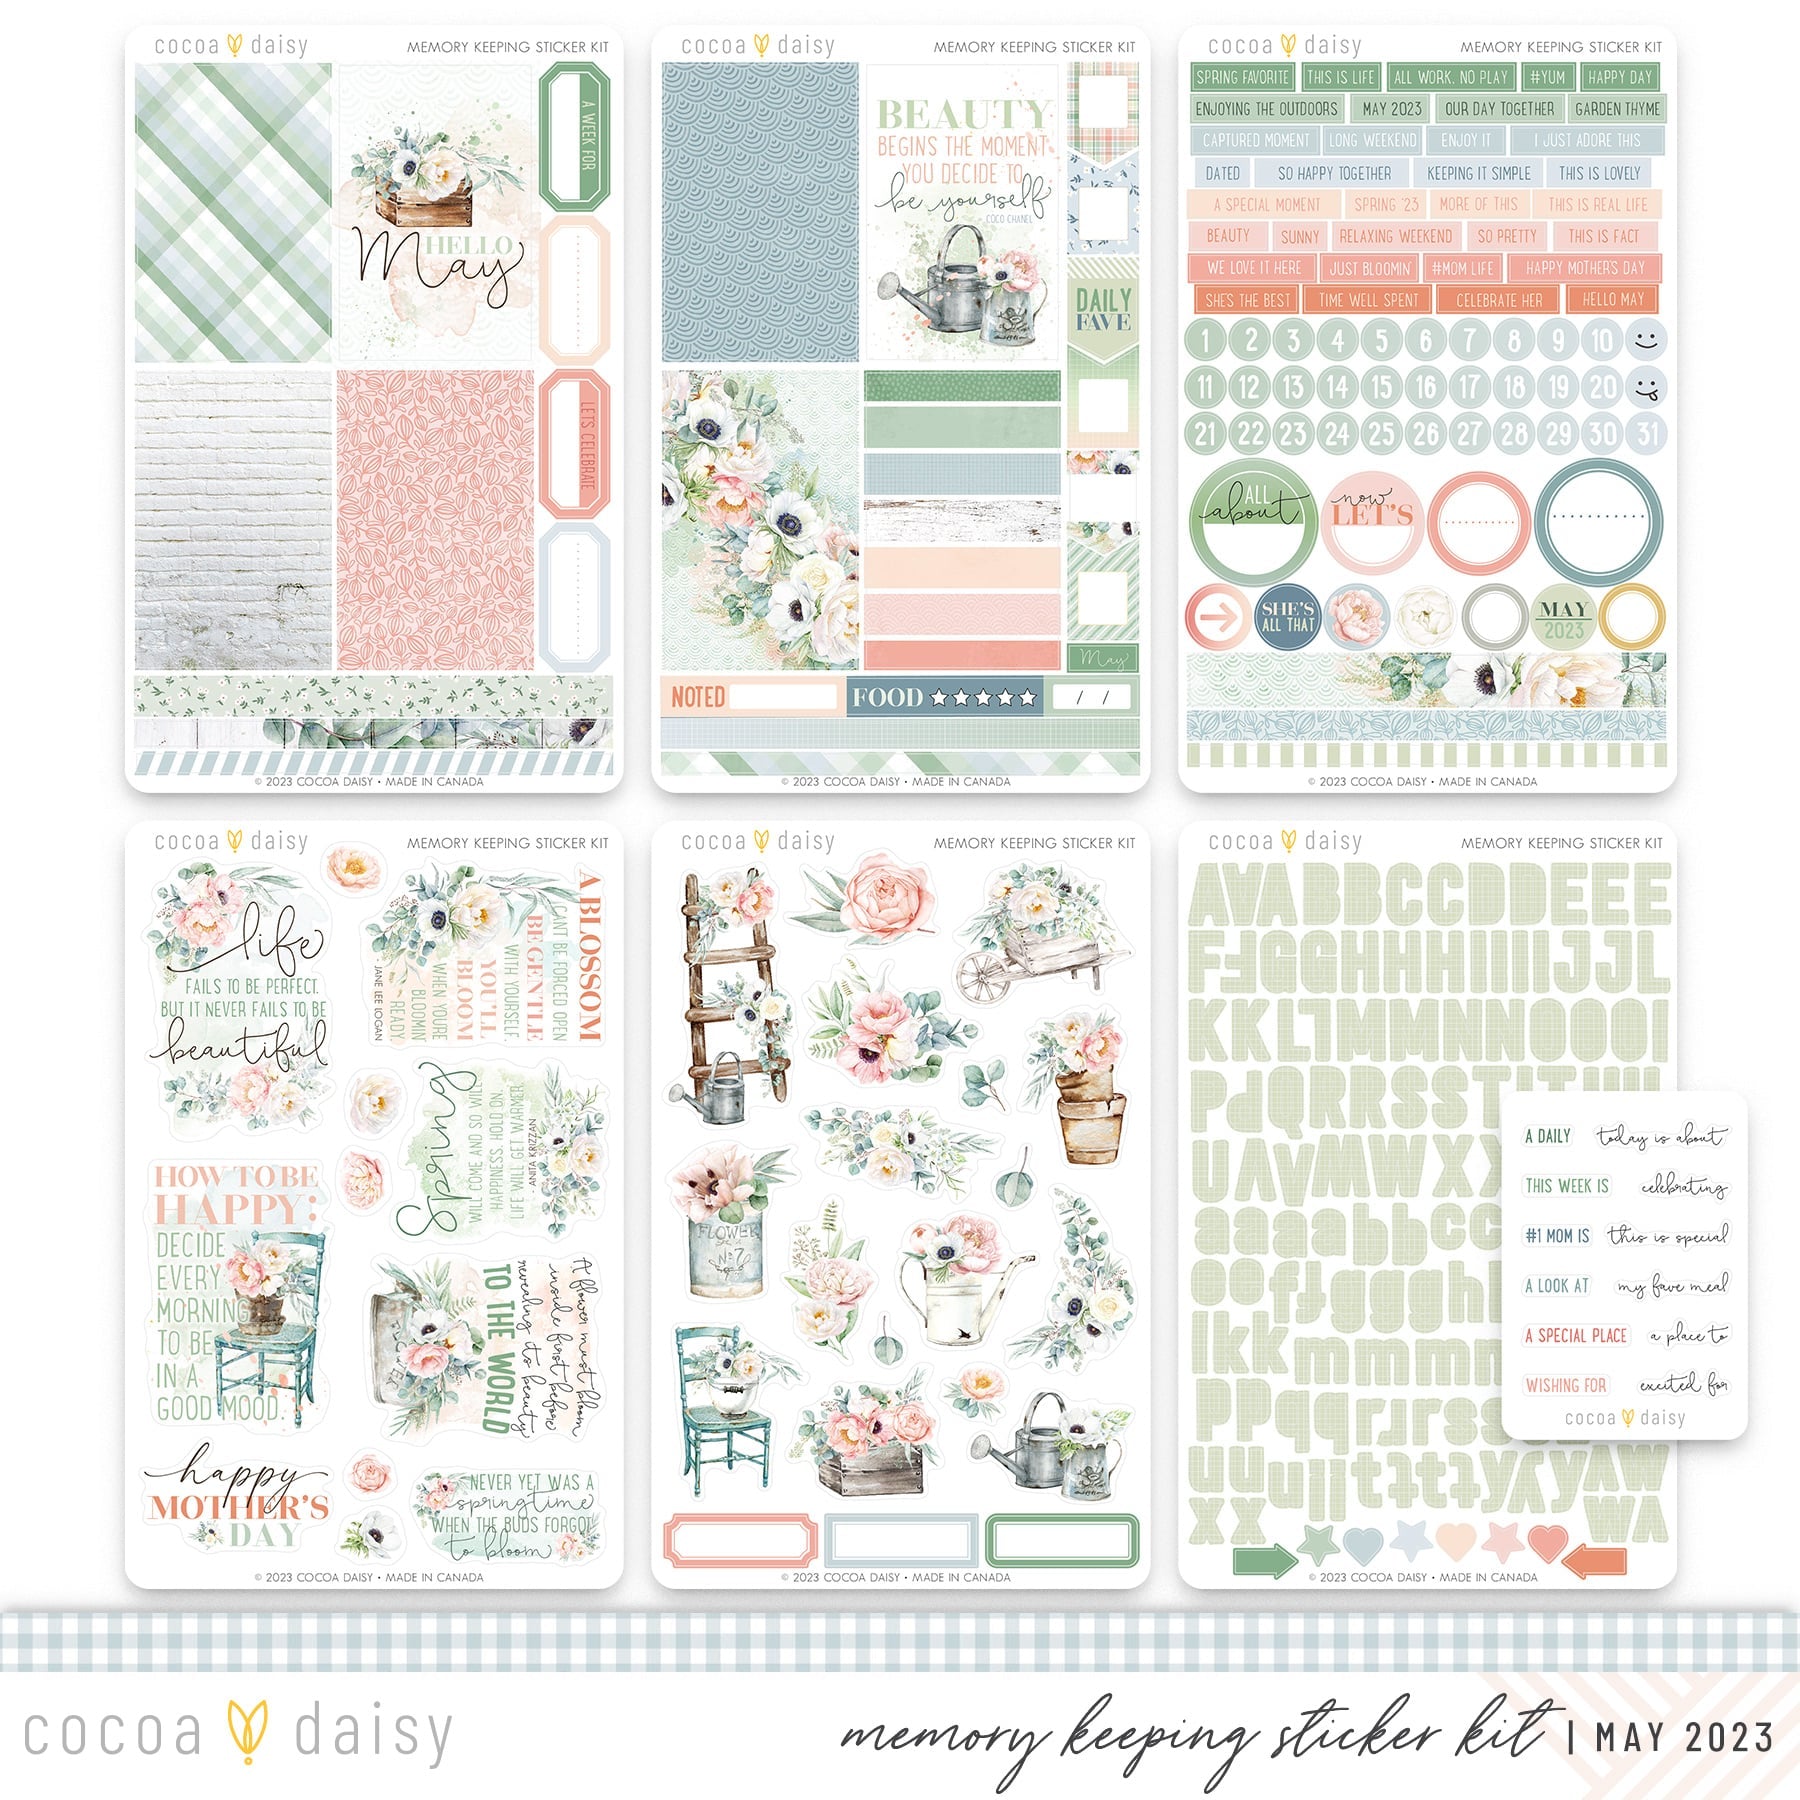 Lets Planner Sticker Sheets 323 Stickers Green, Pink, Gold, and Black